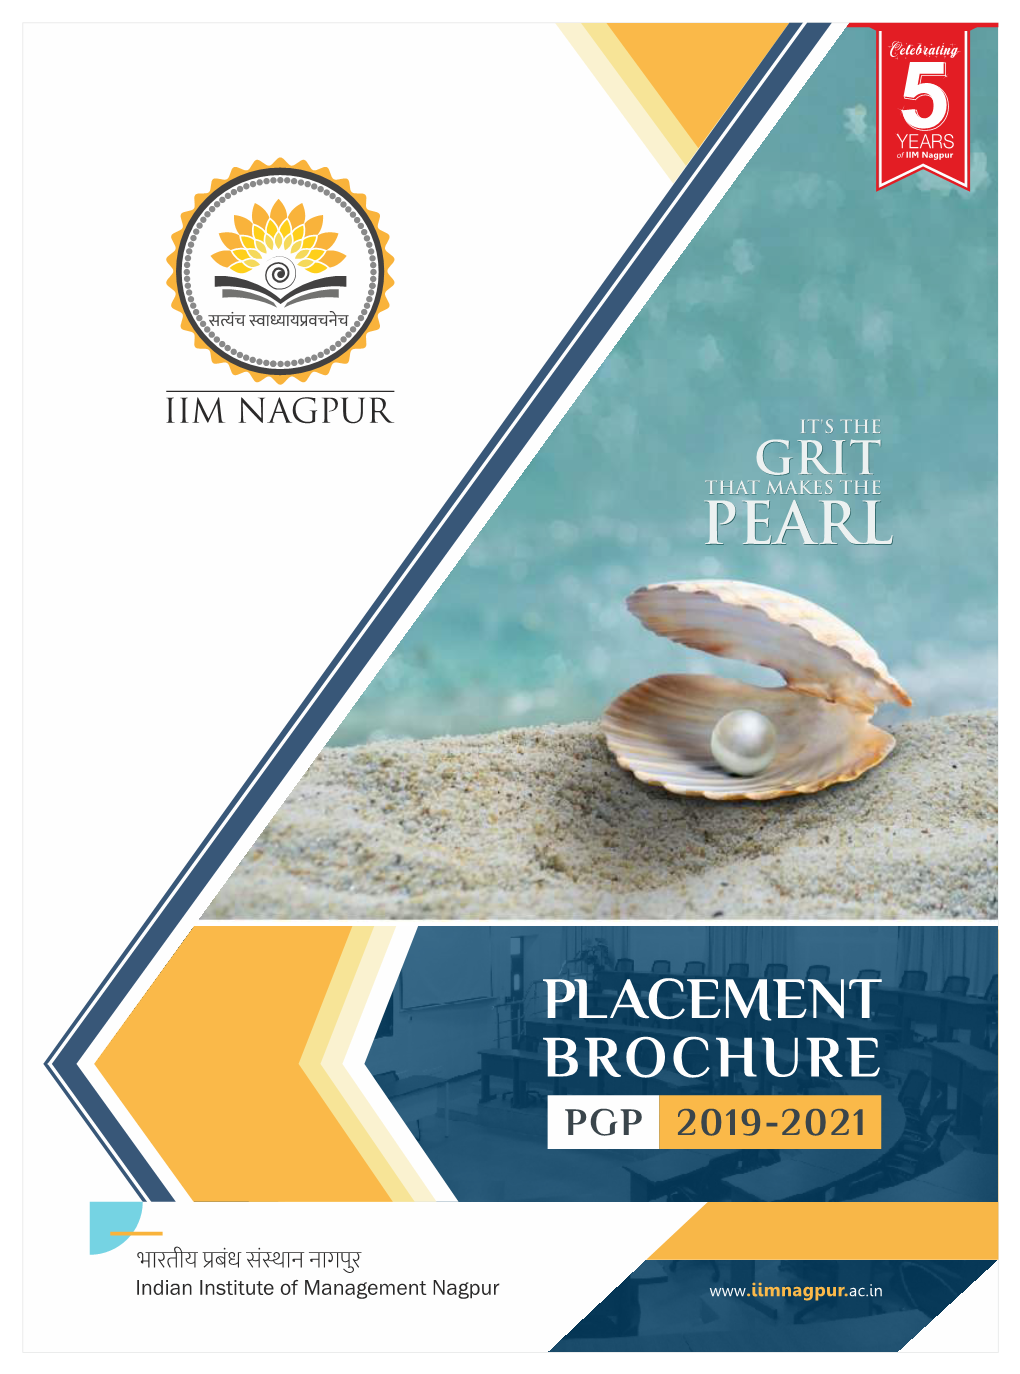 Placement Brochure Pgp 2019-2021